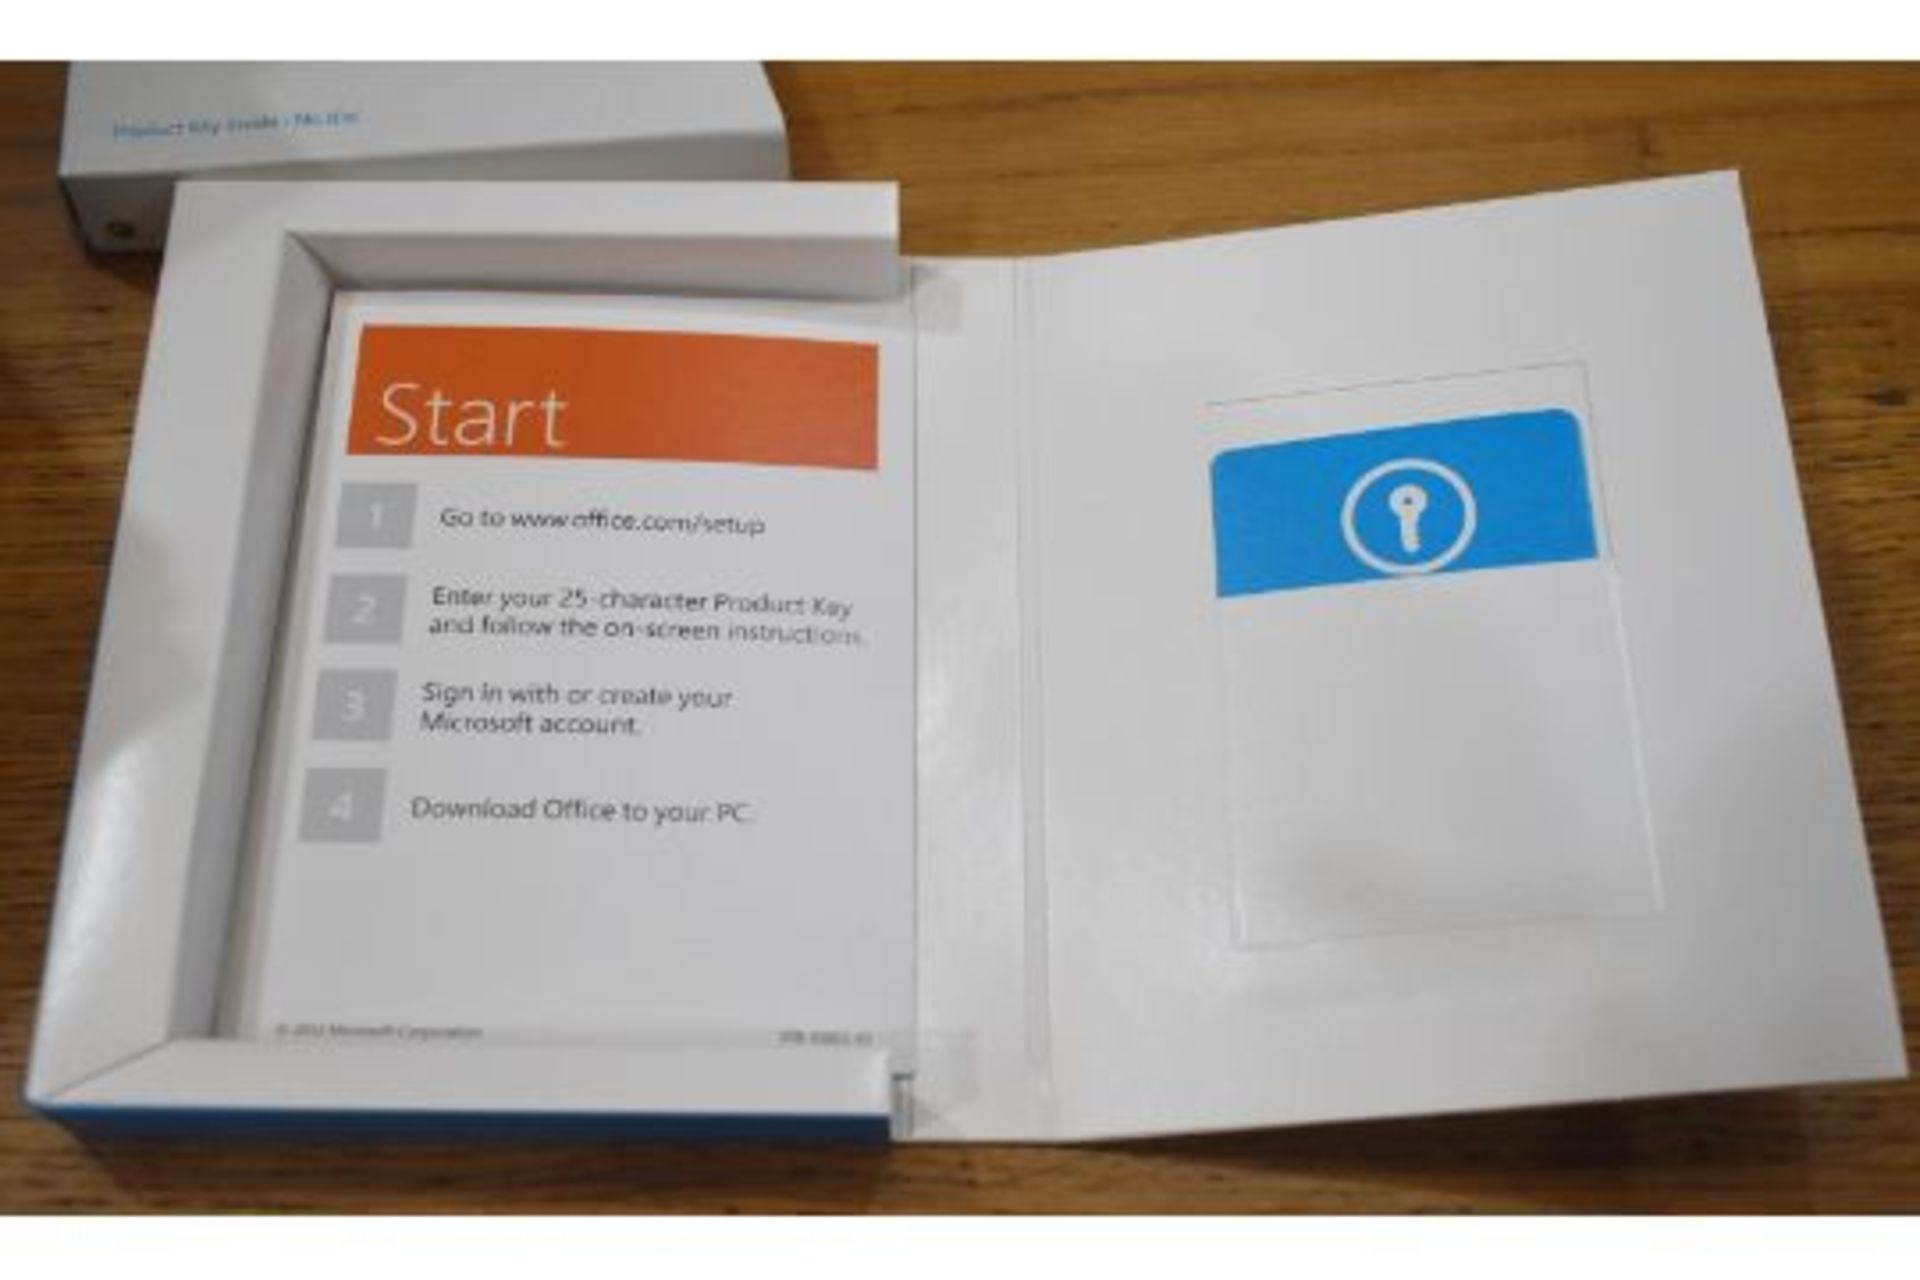 1 x Microsoft Office 2013 Home and Business - Activation Key Card With Original Box - Ref: CG - - Image 2 of 3